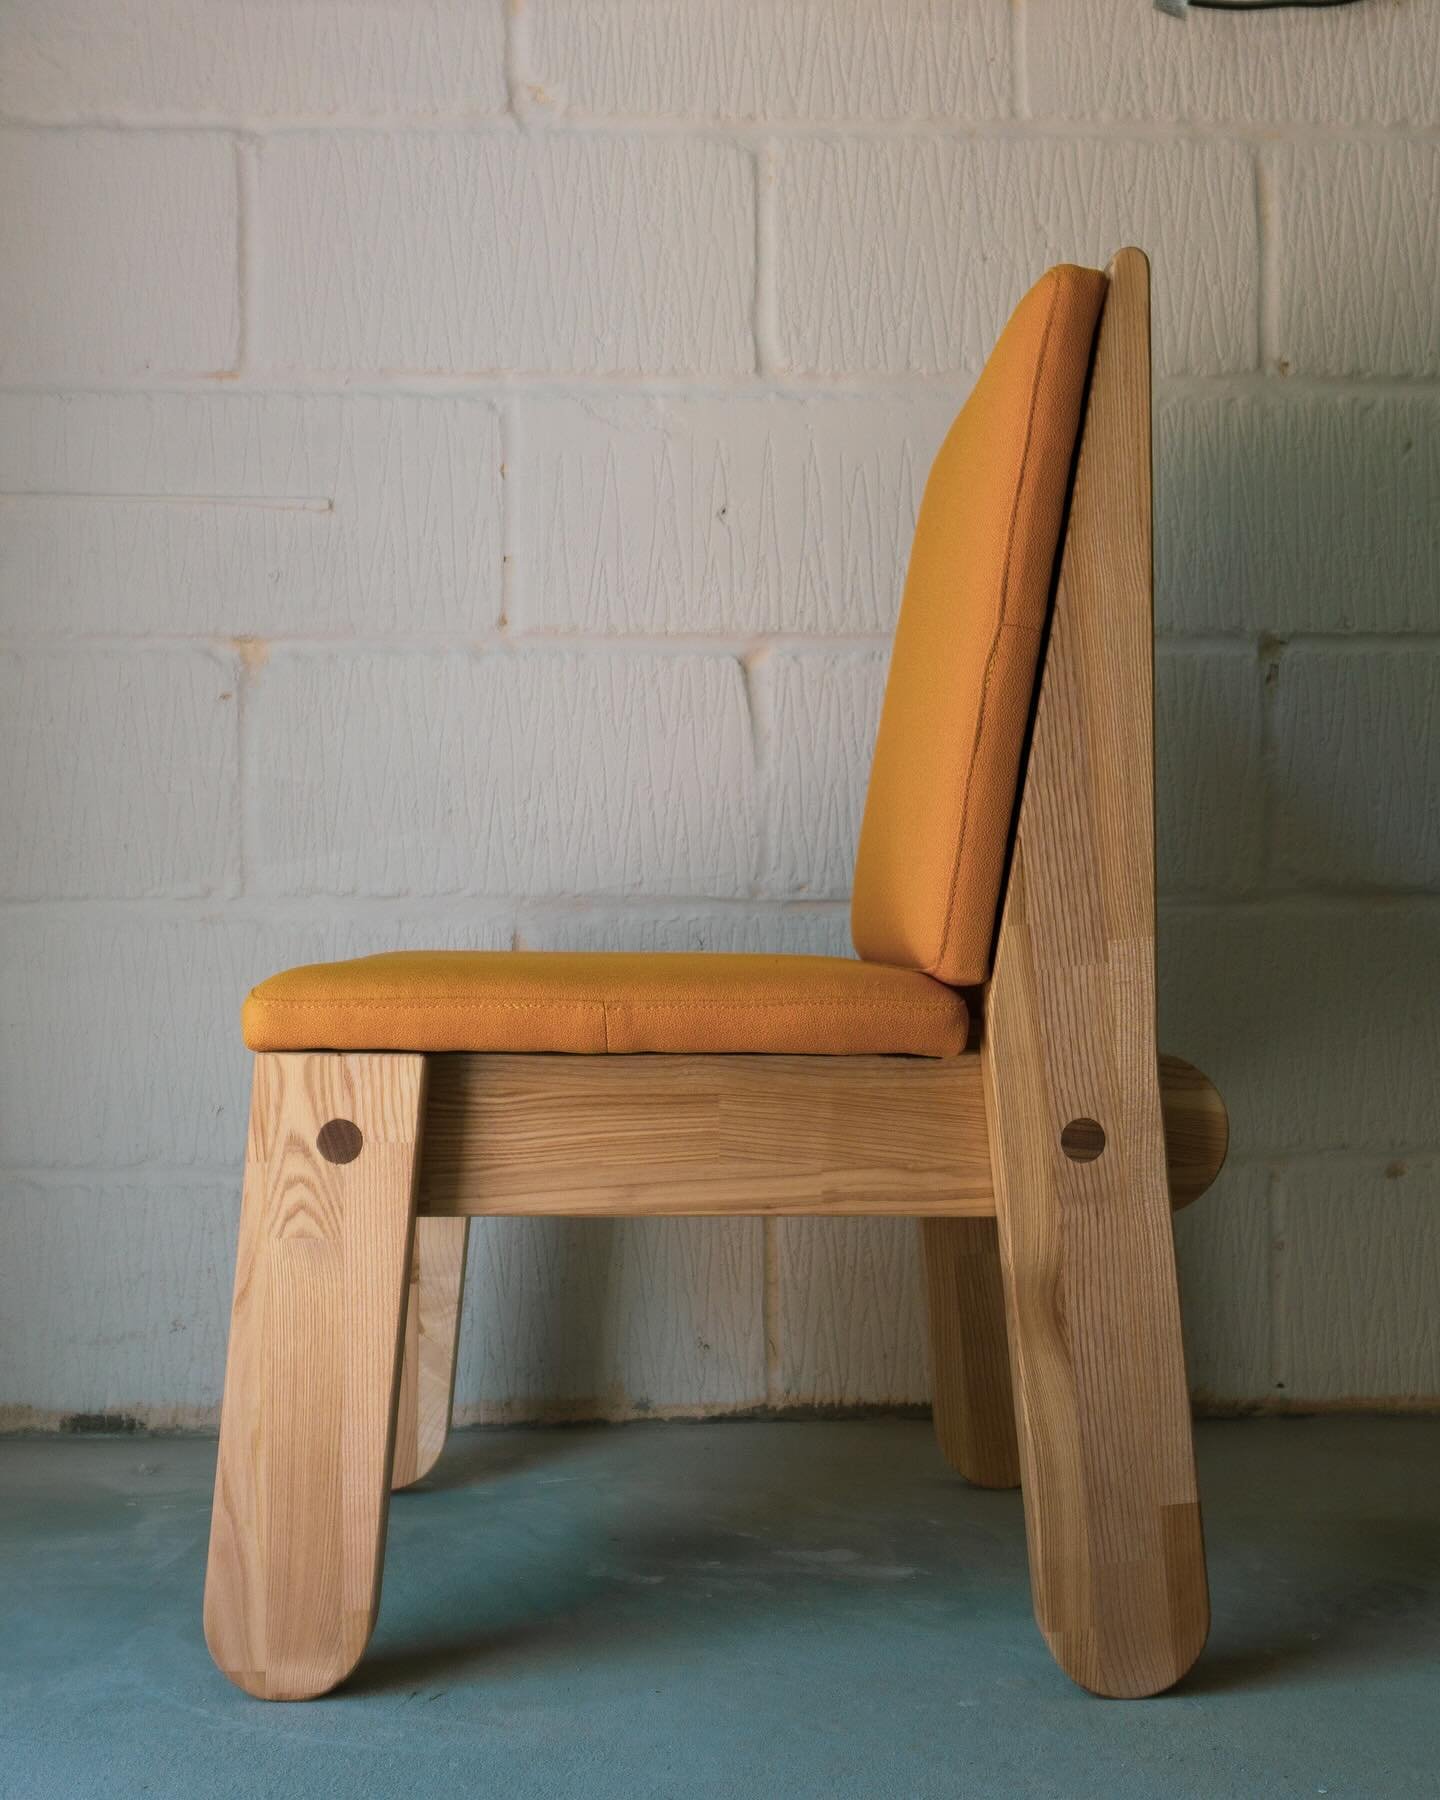 Workshop offcut chair caught in todays 🌞